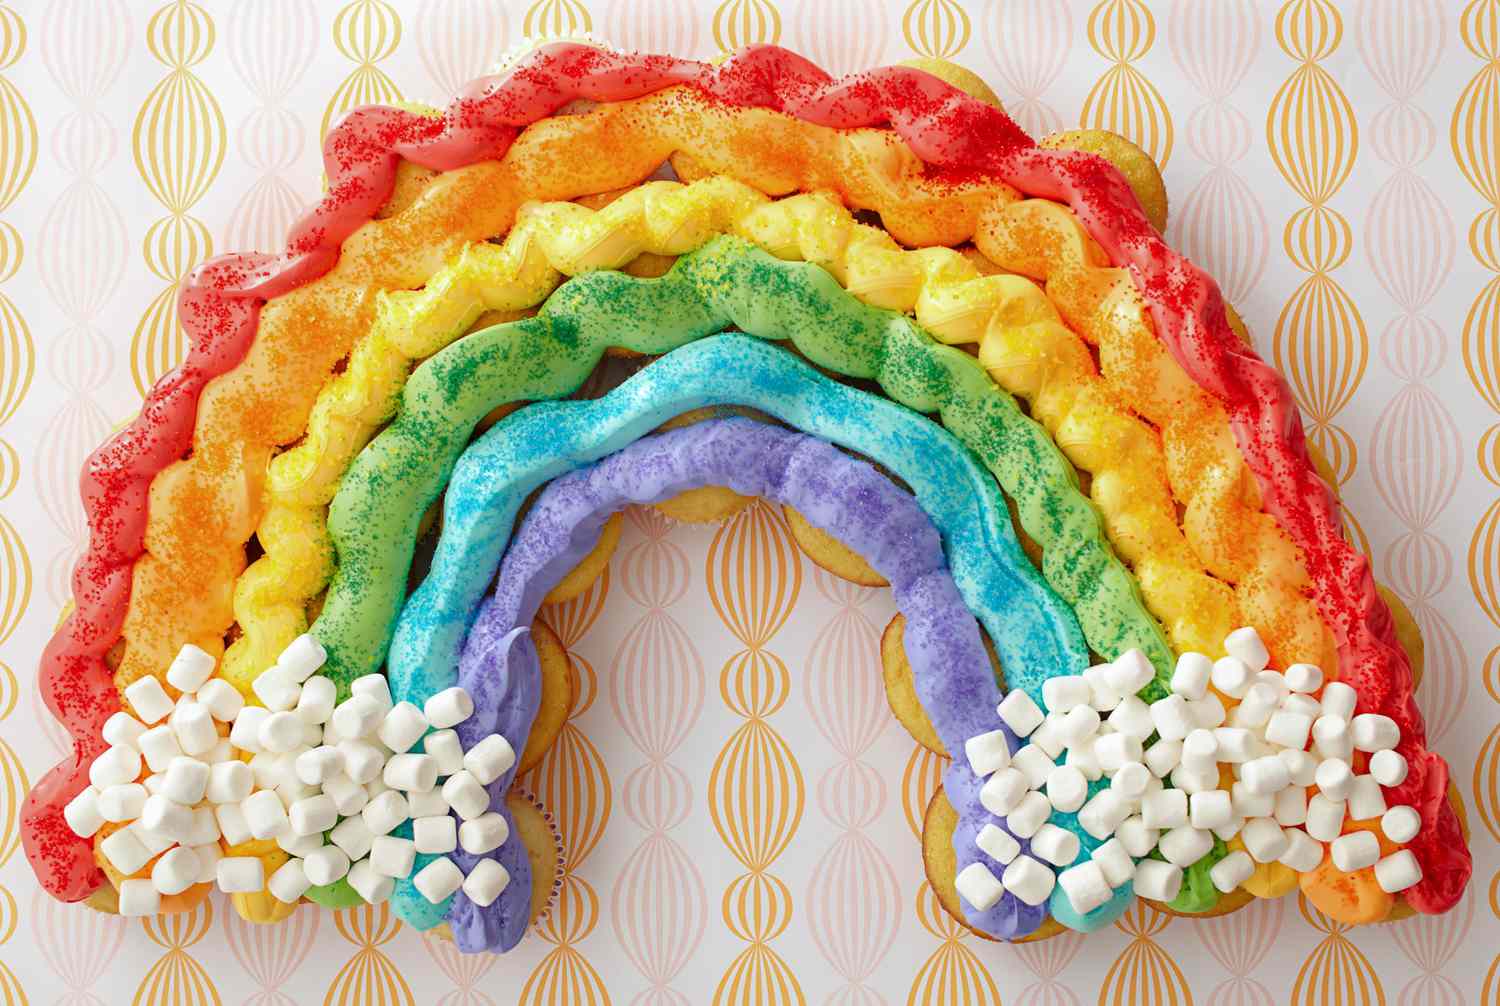 End-of-the-Rainbow Cupcakes 